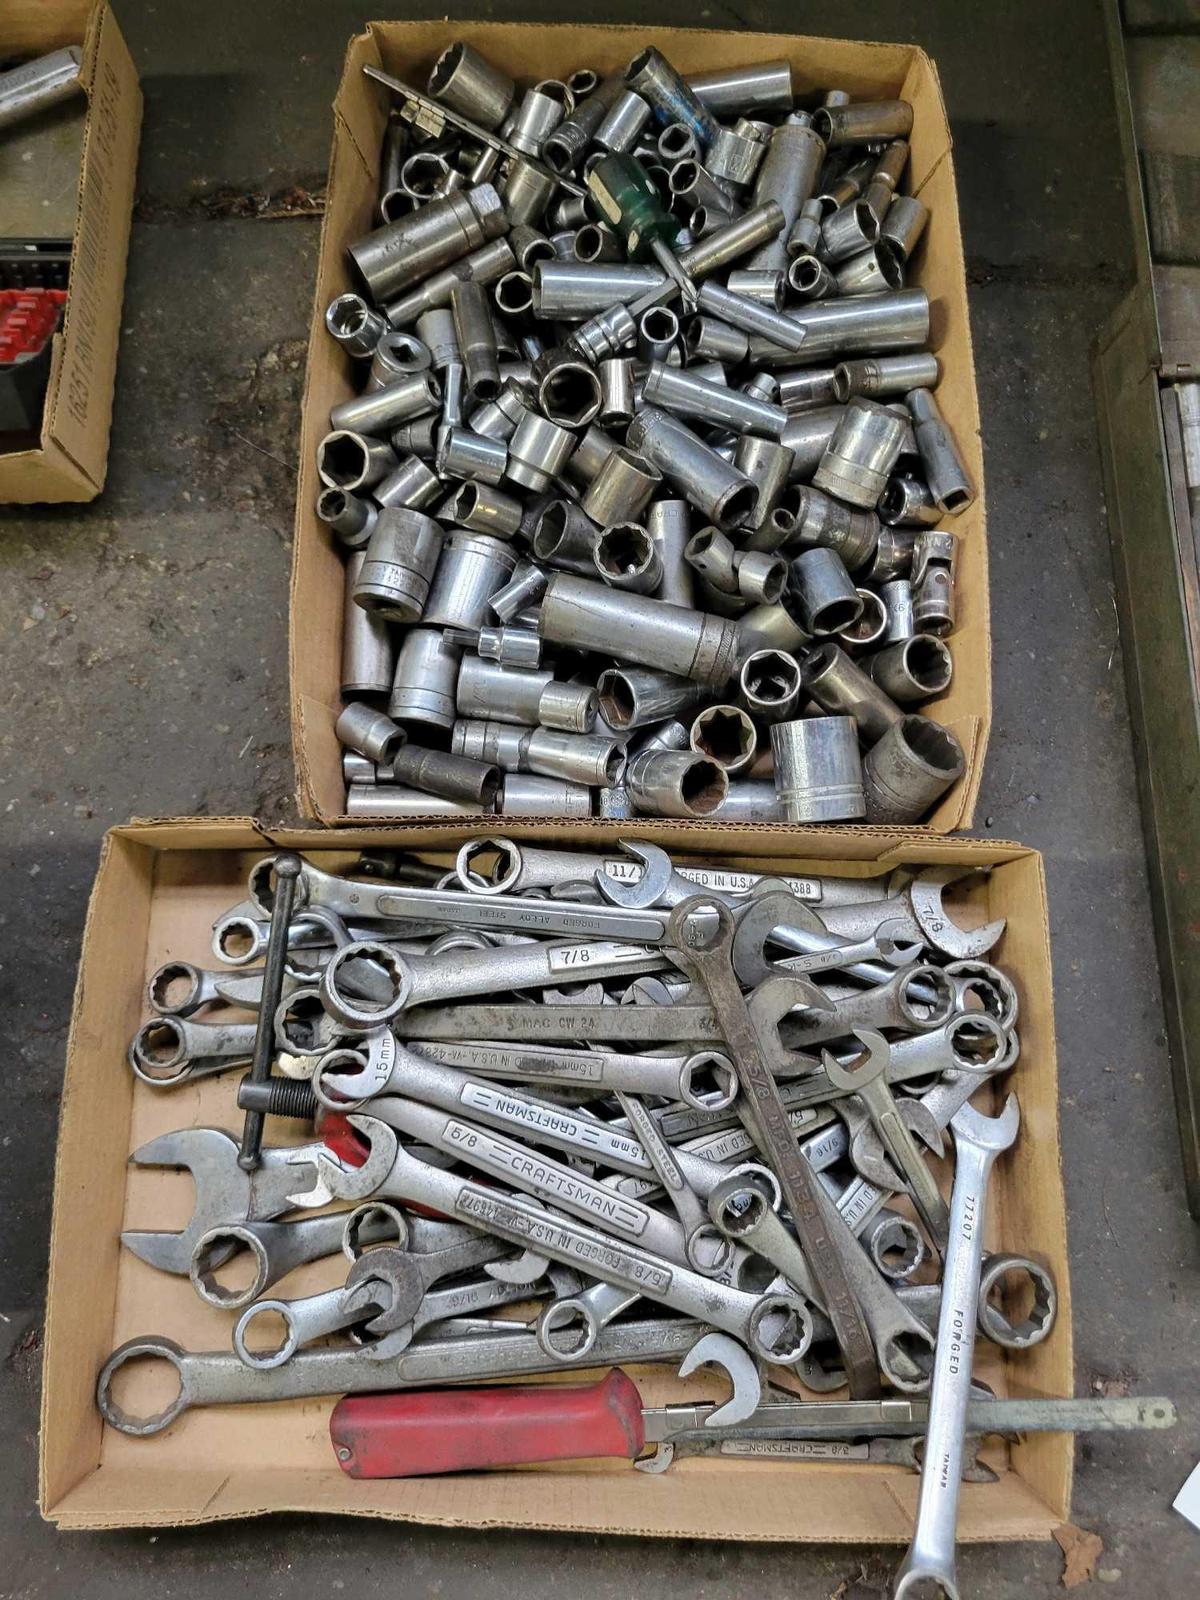 Sockets, wrenches